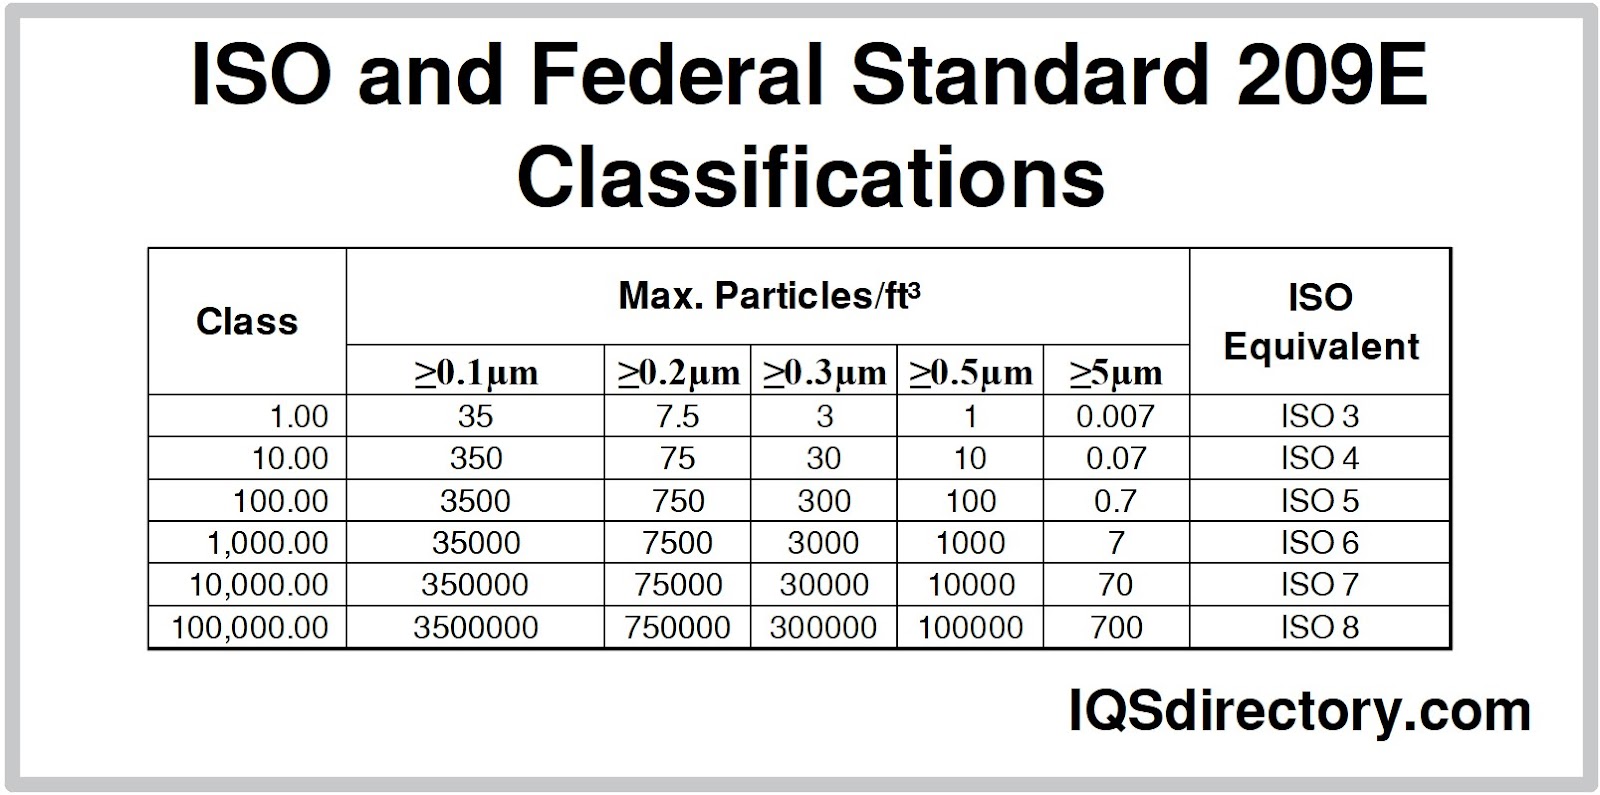 ISO and Federal Standard 209E Classifications